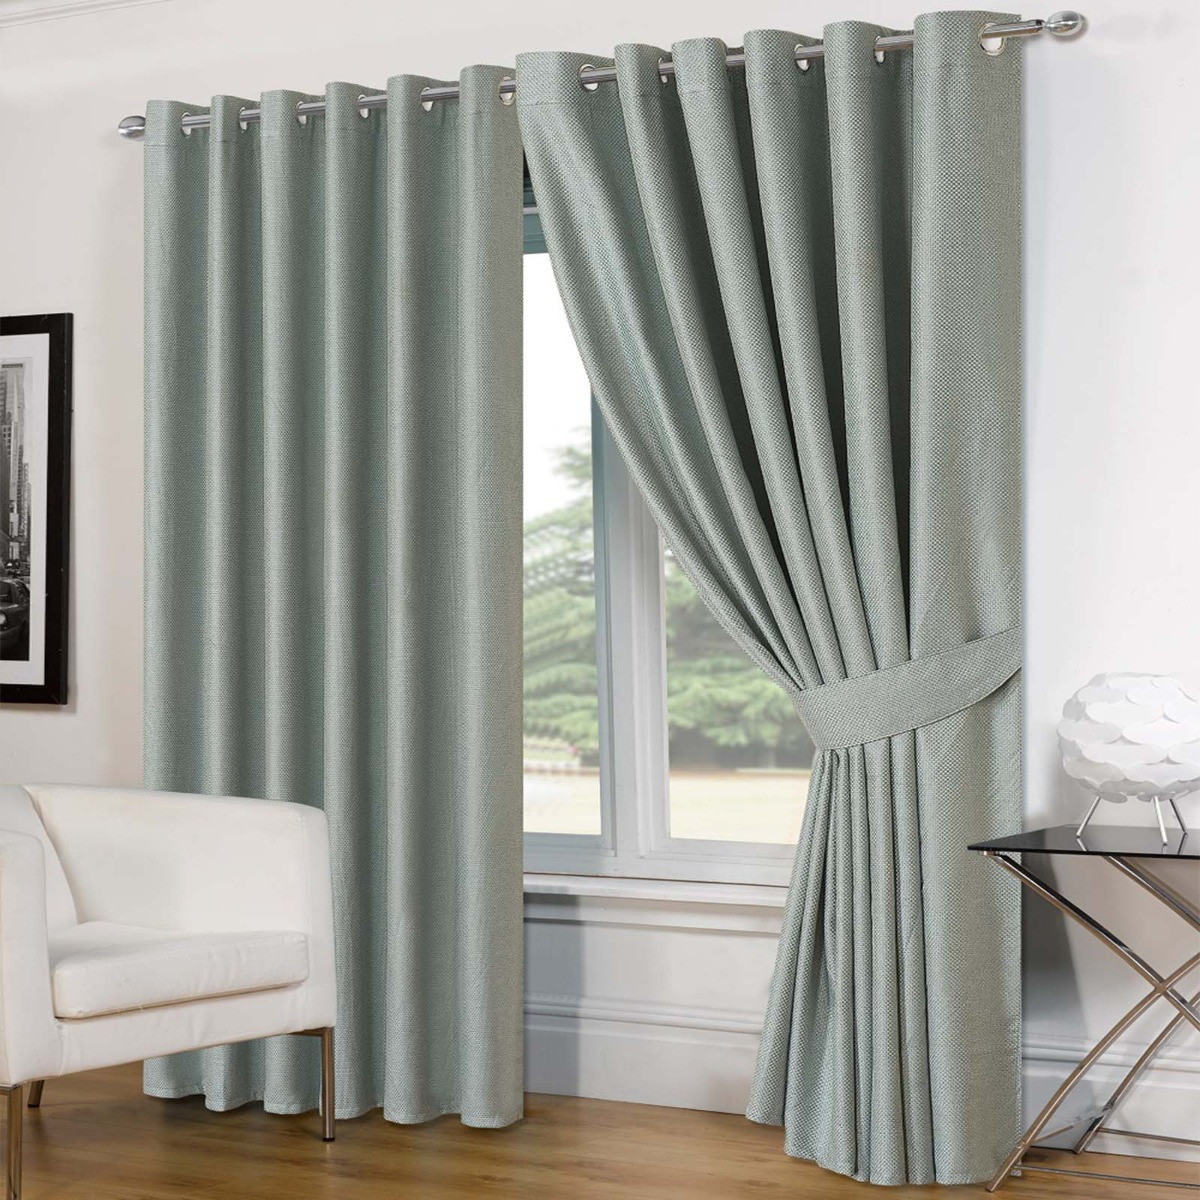 Luxury Basket Weave Lined  Eyelet Curtains with Tiebacks - Duck Egg 46"x54">